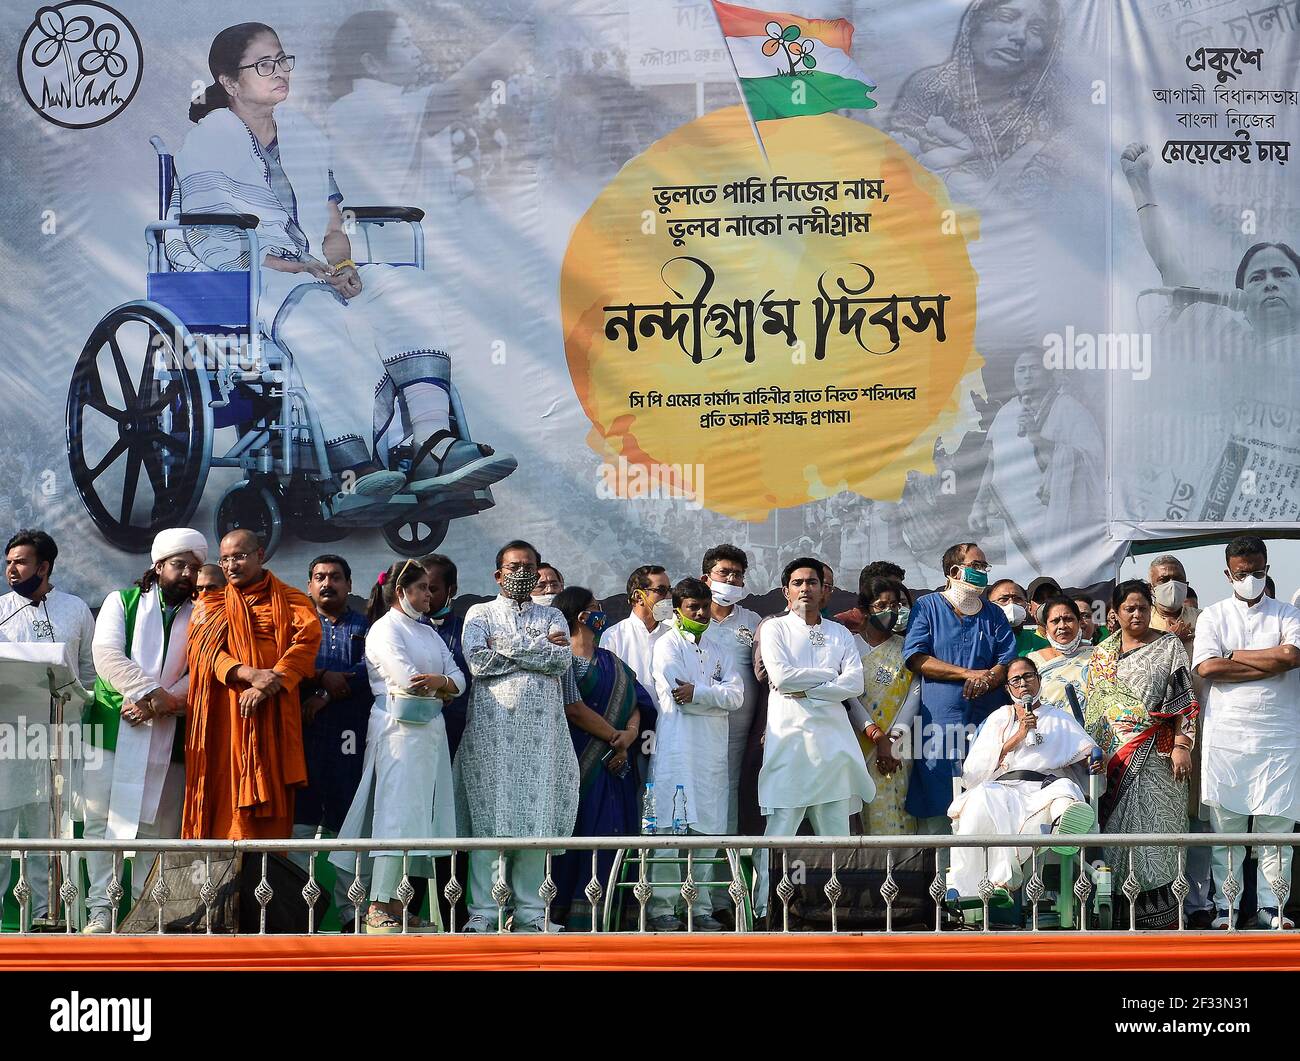 Kolkata, India. 14th Mar, 2021. Chief Minister of West Bengal and Trinamool Congress Supremo Mamata Banerjee addresses a rally while sitting on a wheel-chair to observe Nangiram Diwas. Trinamool Congress Supremo Mamata Banerjee attended her first public event, after she was injured and hospitalised during election campaign in Nandigram four days ago in Kolkata. (Photo by Sanjay Purkait/Pacific Press) Credit: Pacific Press Media Production Corp./Alamy Live News Stock Photo